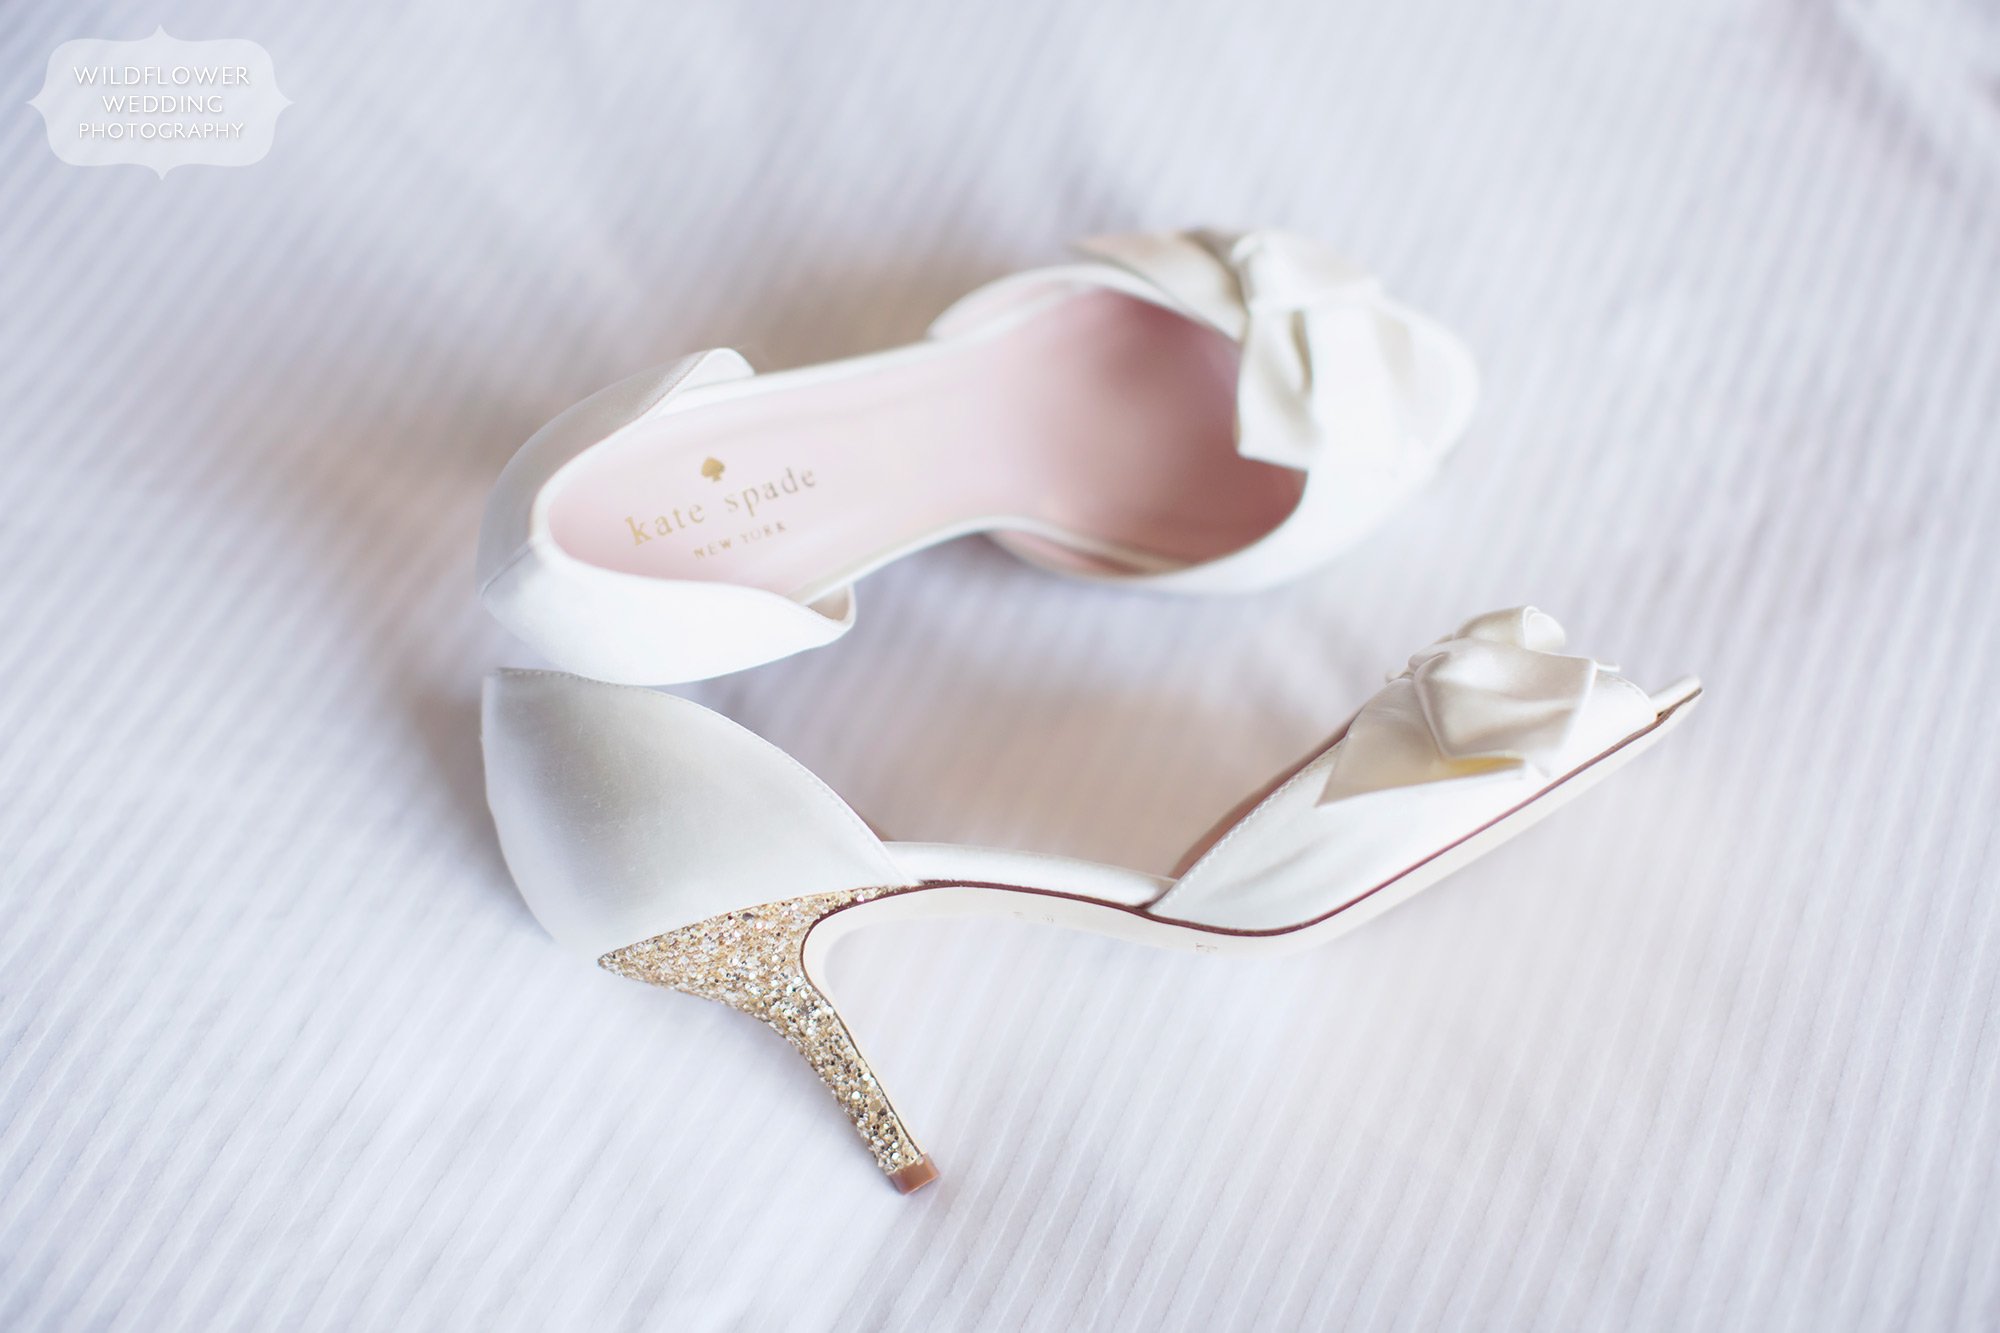 Gorgeous white and gold sparkle heels of Kate Spade wedding shoes for this Mid-Missouri wedding.